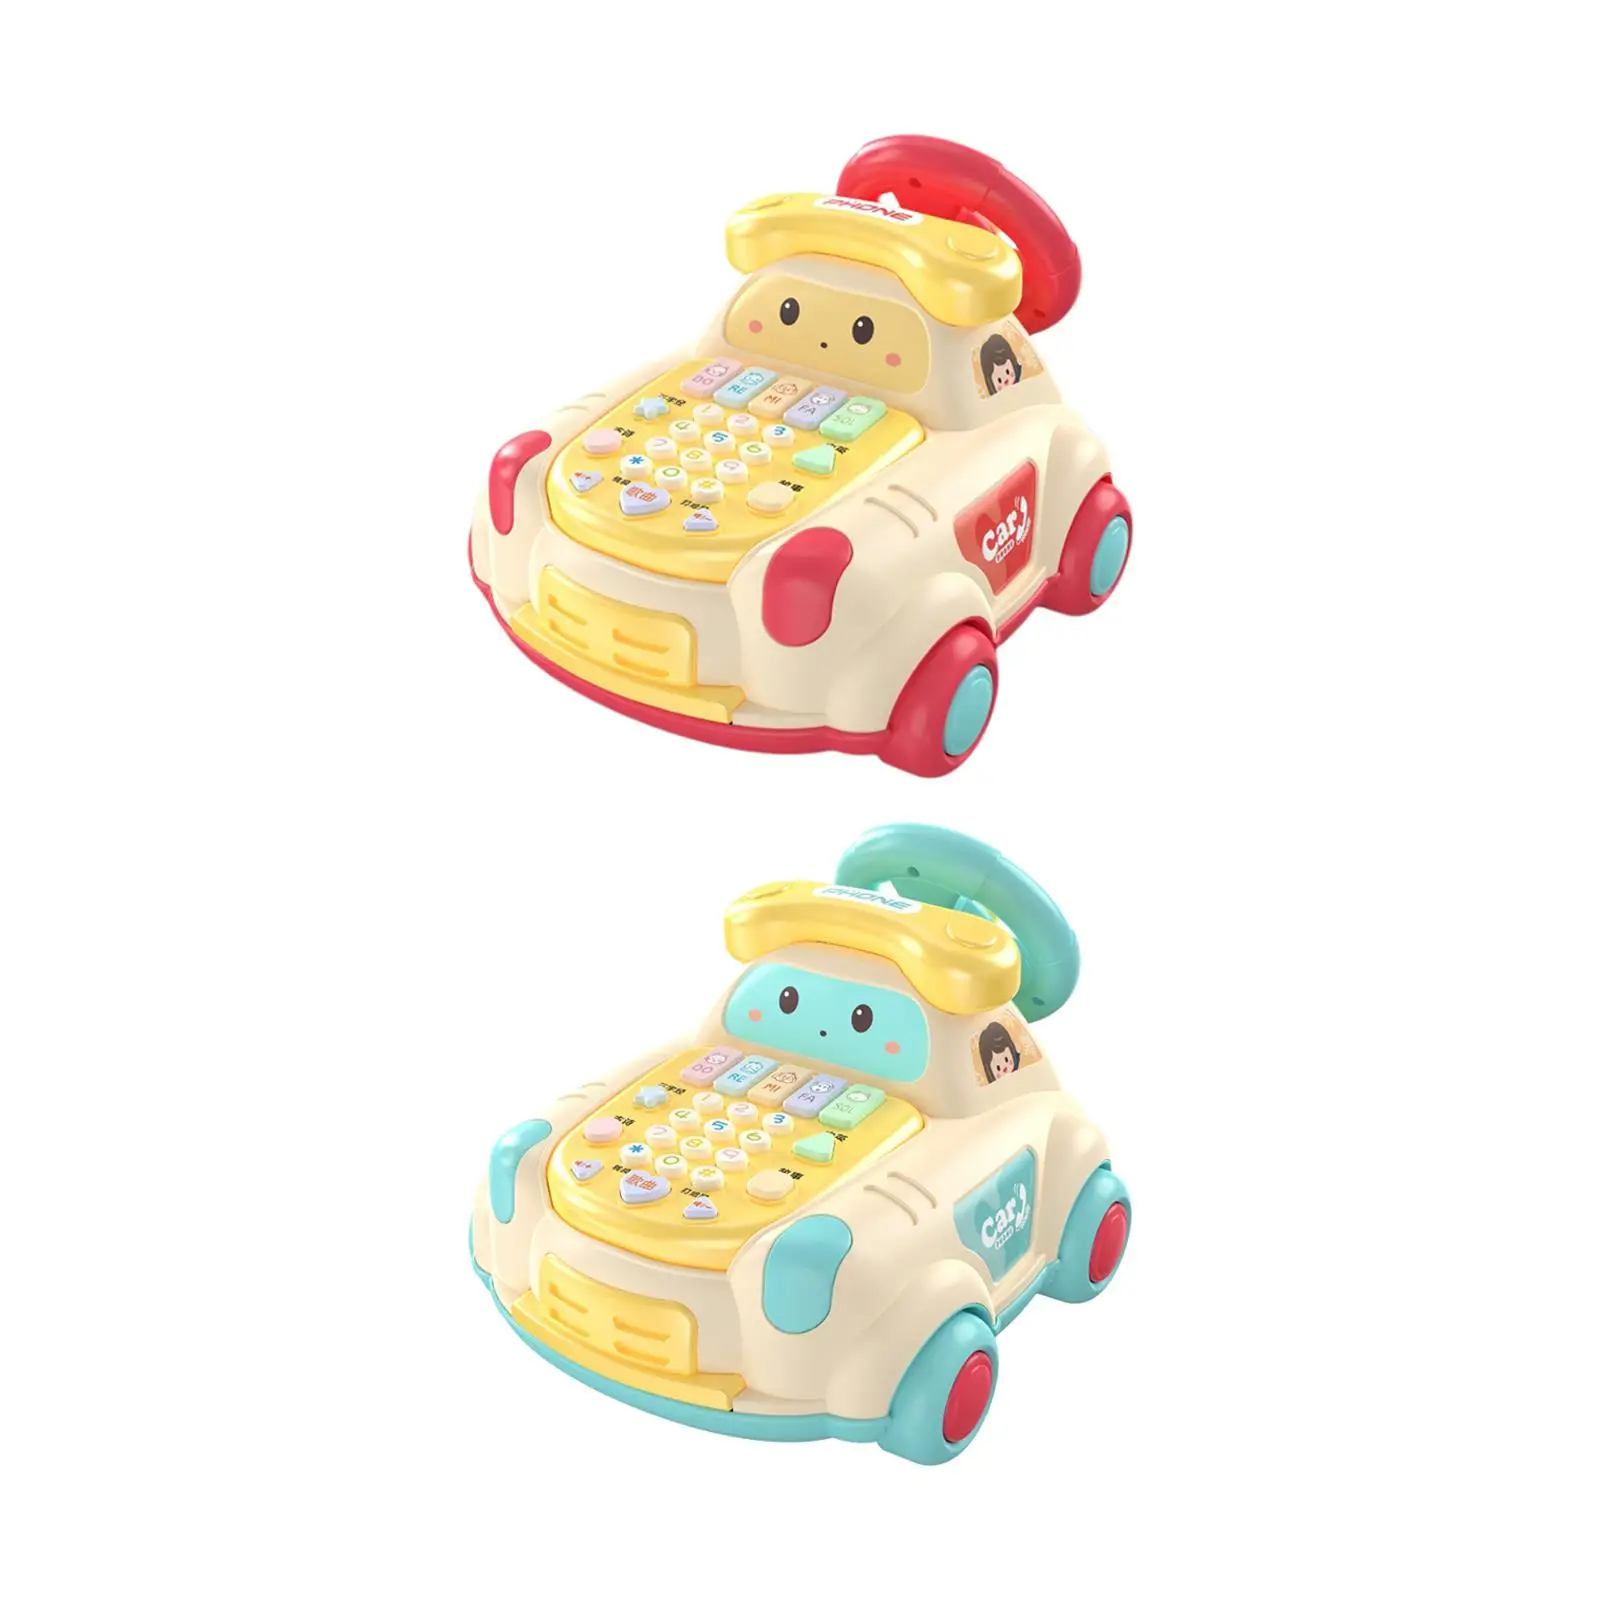 Baby Musical Toys Car musical Movable Pull Toys Music Light Phone Toy for Education Interaction Activity Learning Preschool